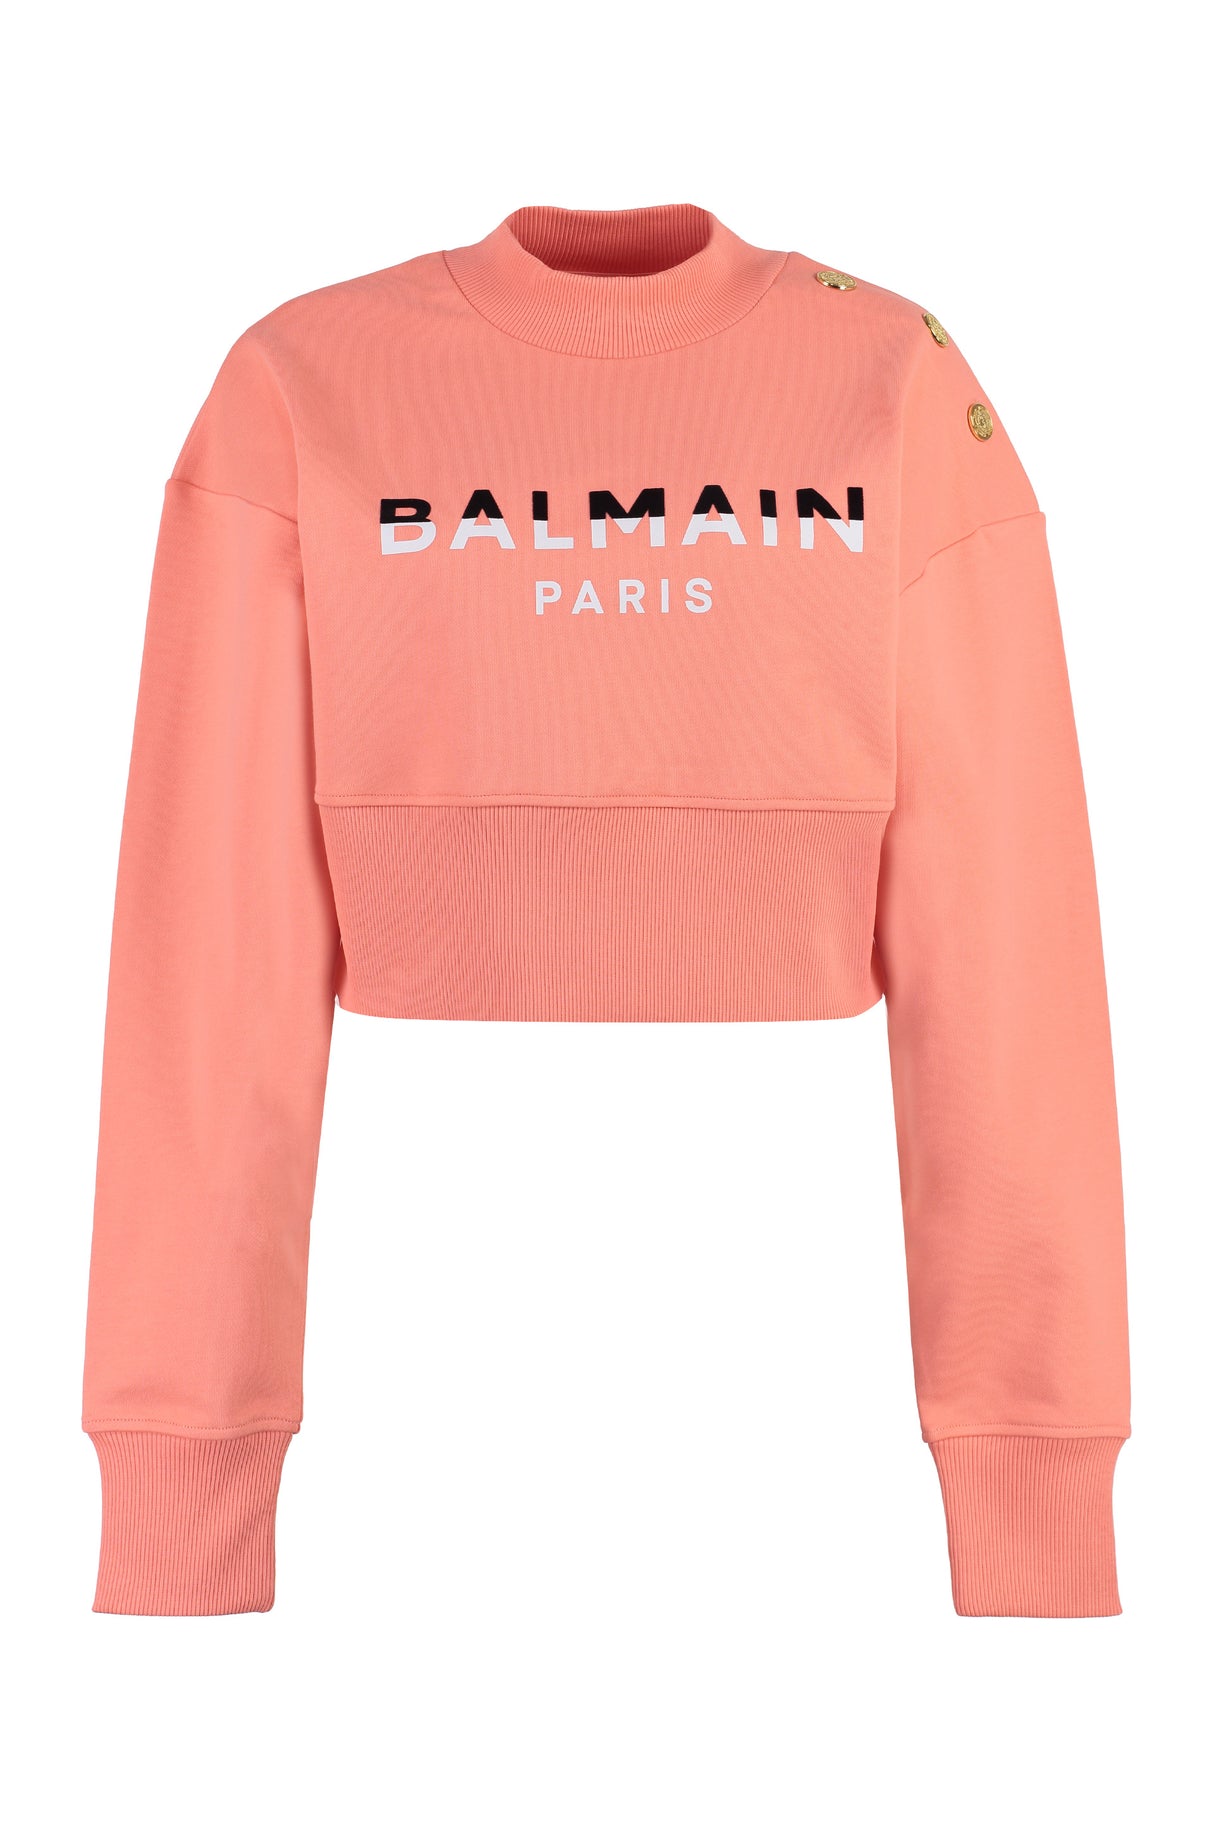 BALMAIN Cropped Coral Velvet Sweatshirt with Embellished Buttons